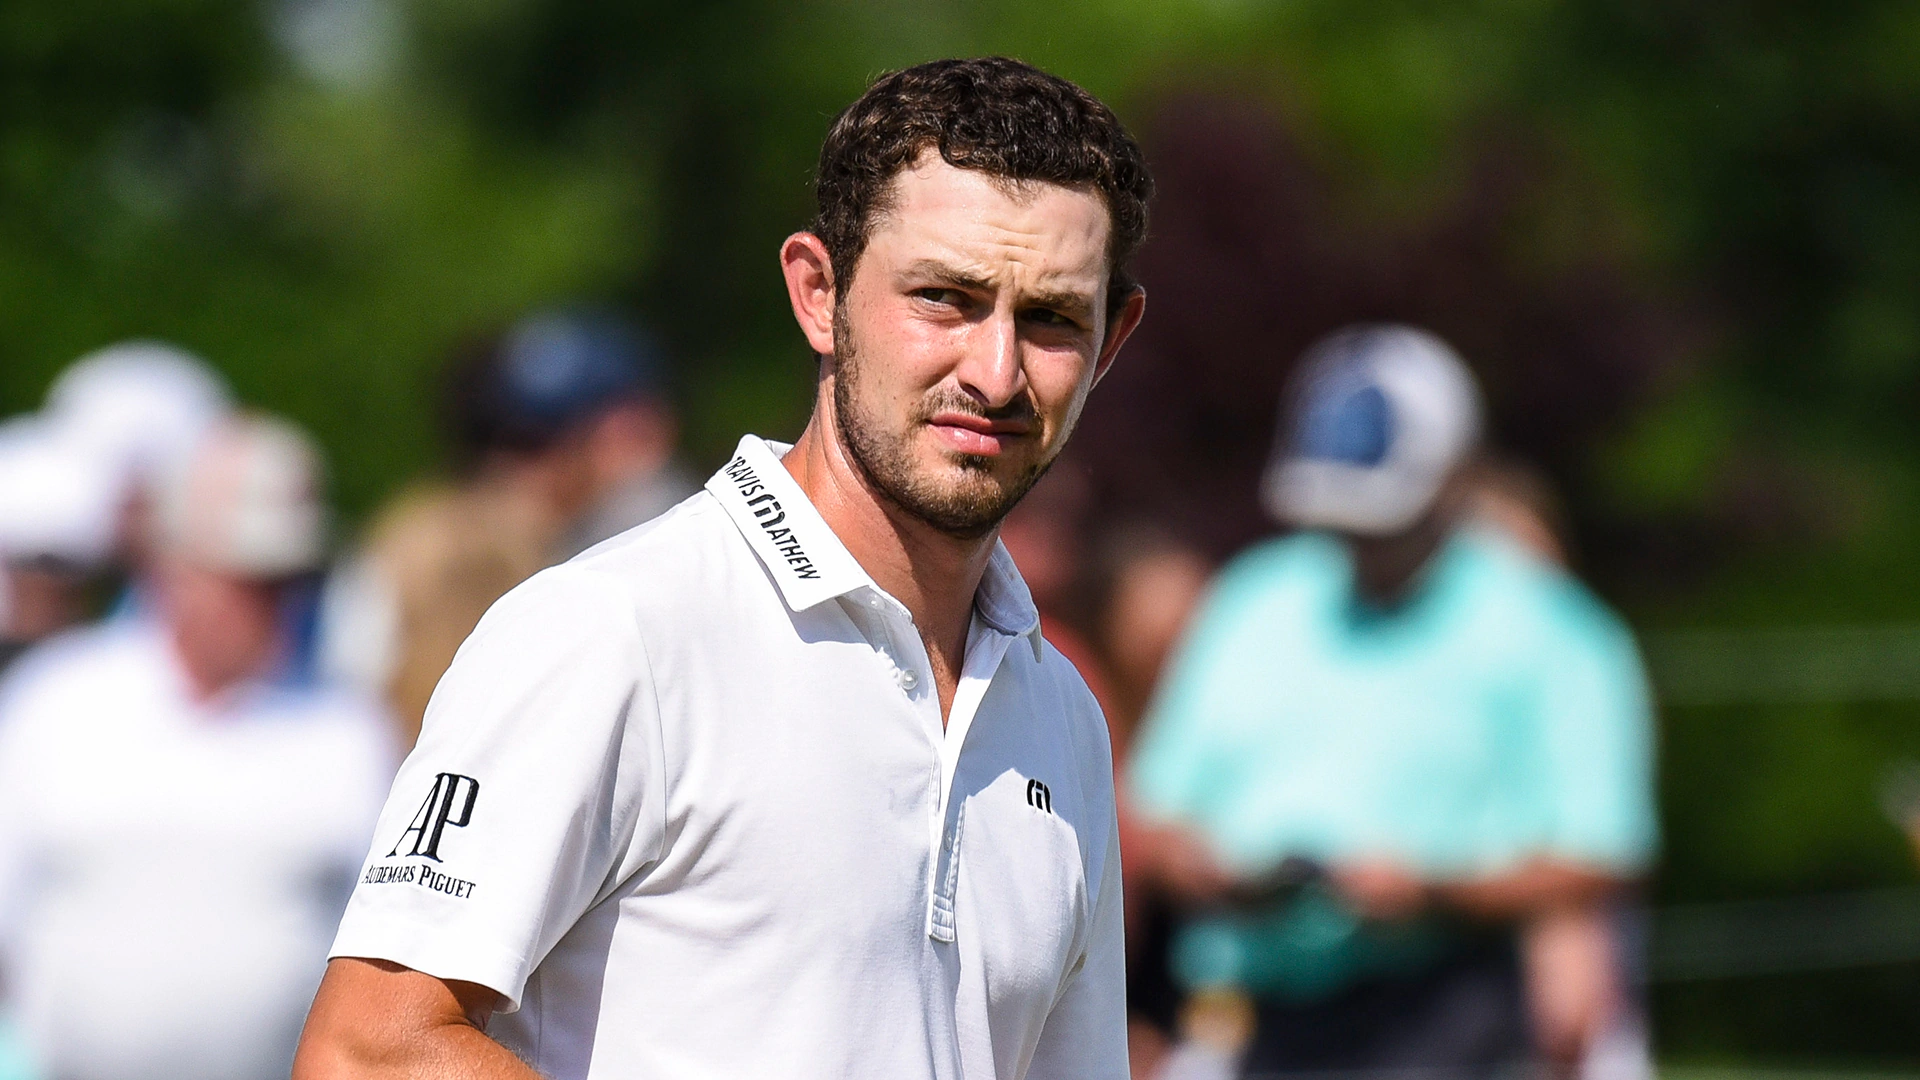 Hole-in-one, eagle-3 key to Cantlay's 66